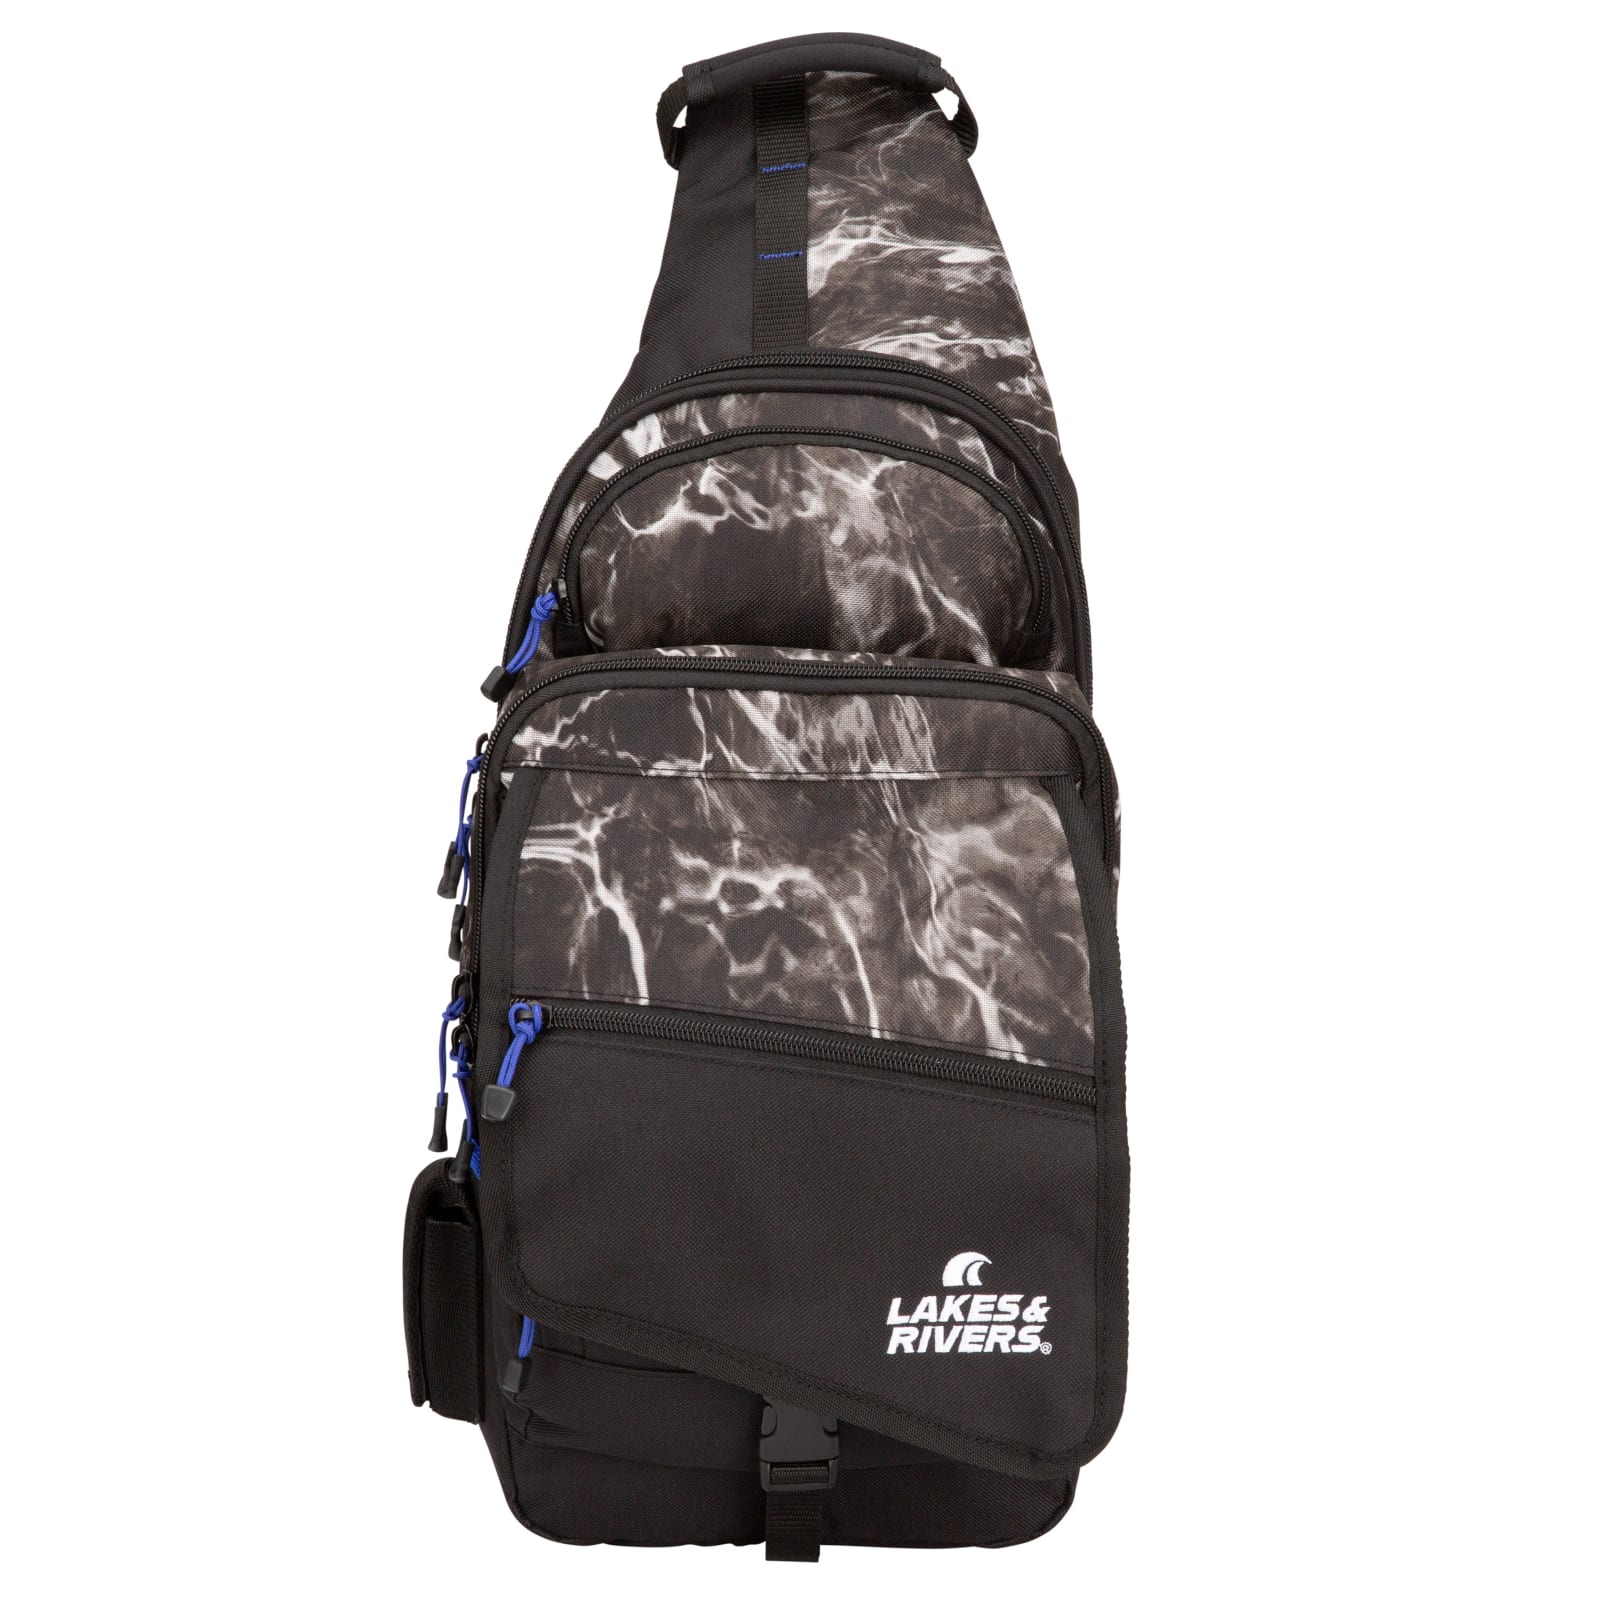 Pro Series Sling with 1 Med Box - Mossy Oak Aqua Blacktip by Lakes